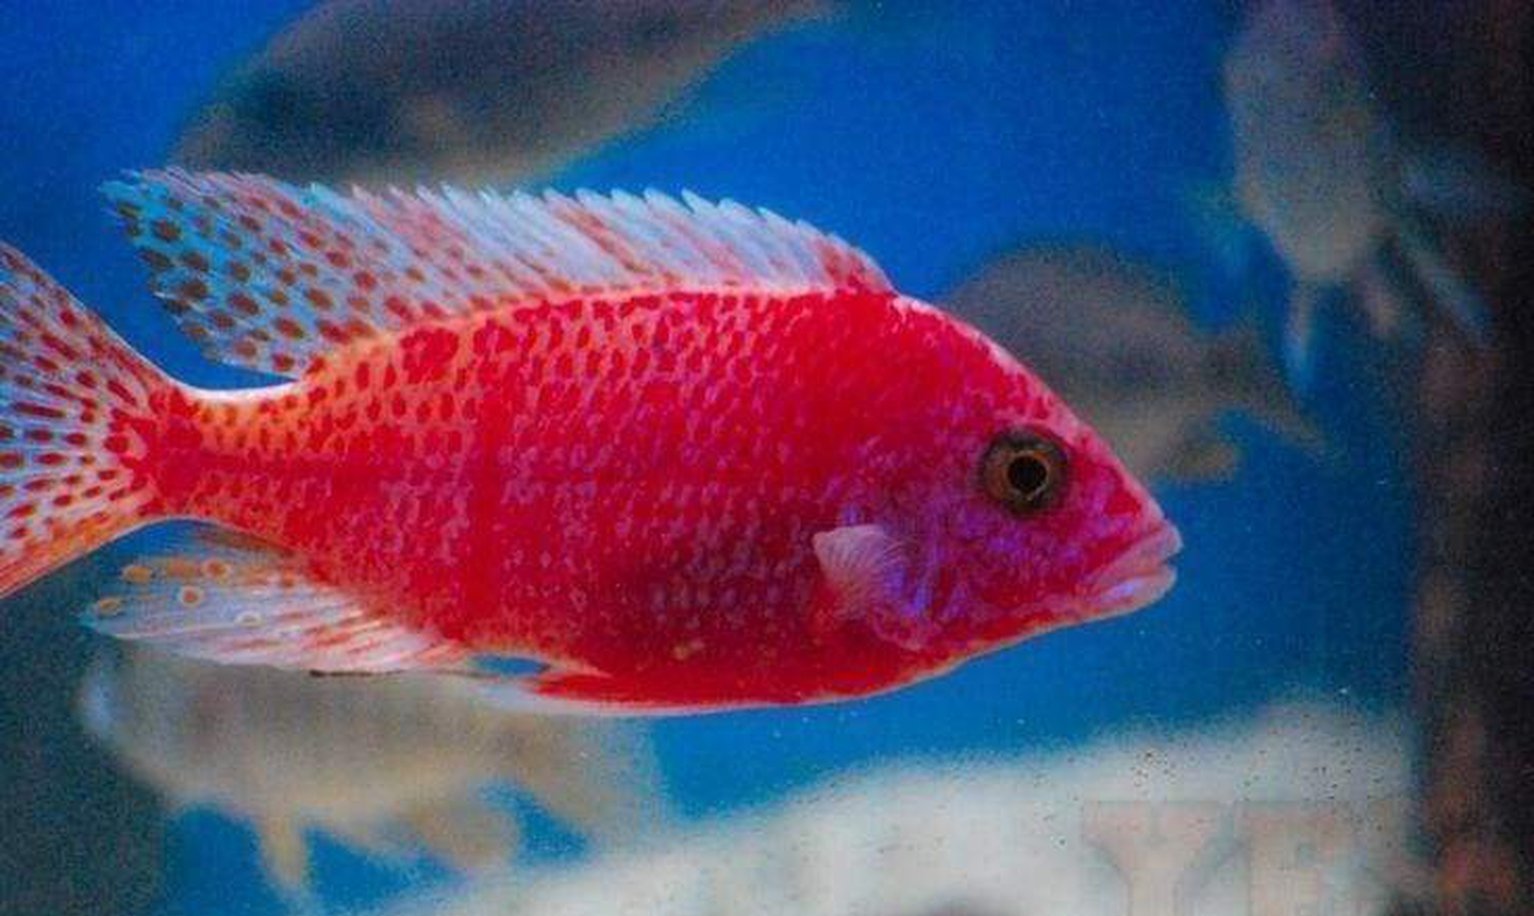 X10 Strawberry Peacock Cichlids - Sml/Med 1 1/2" - 3" - Freshwater-Freshwater Fish Package-www.YourFishStore.com